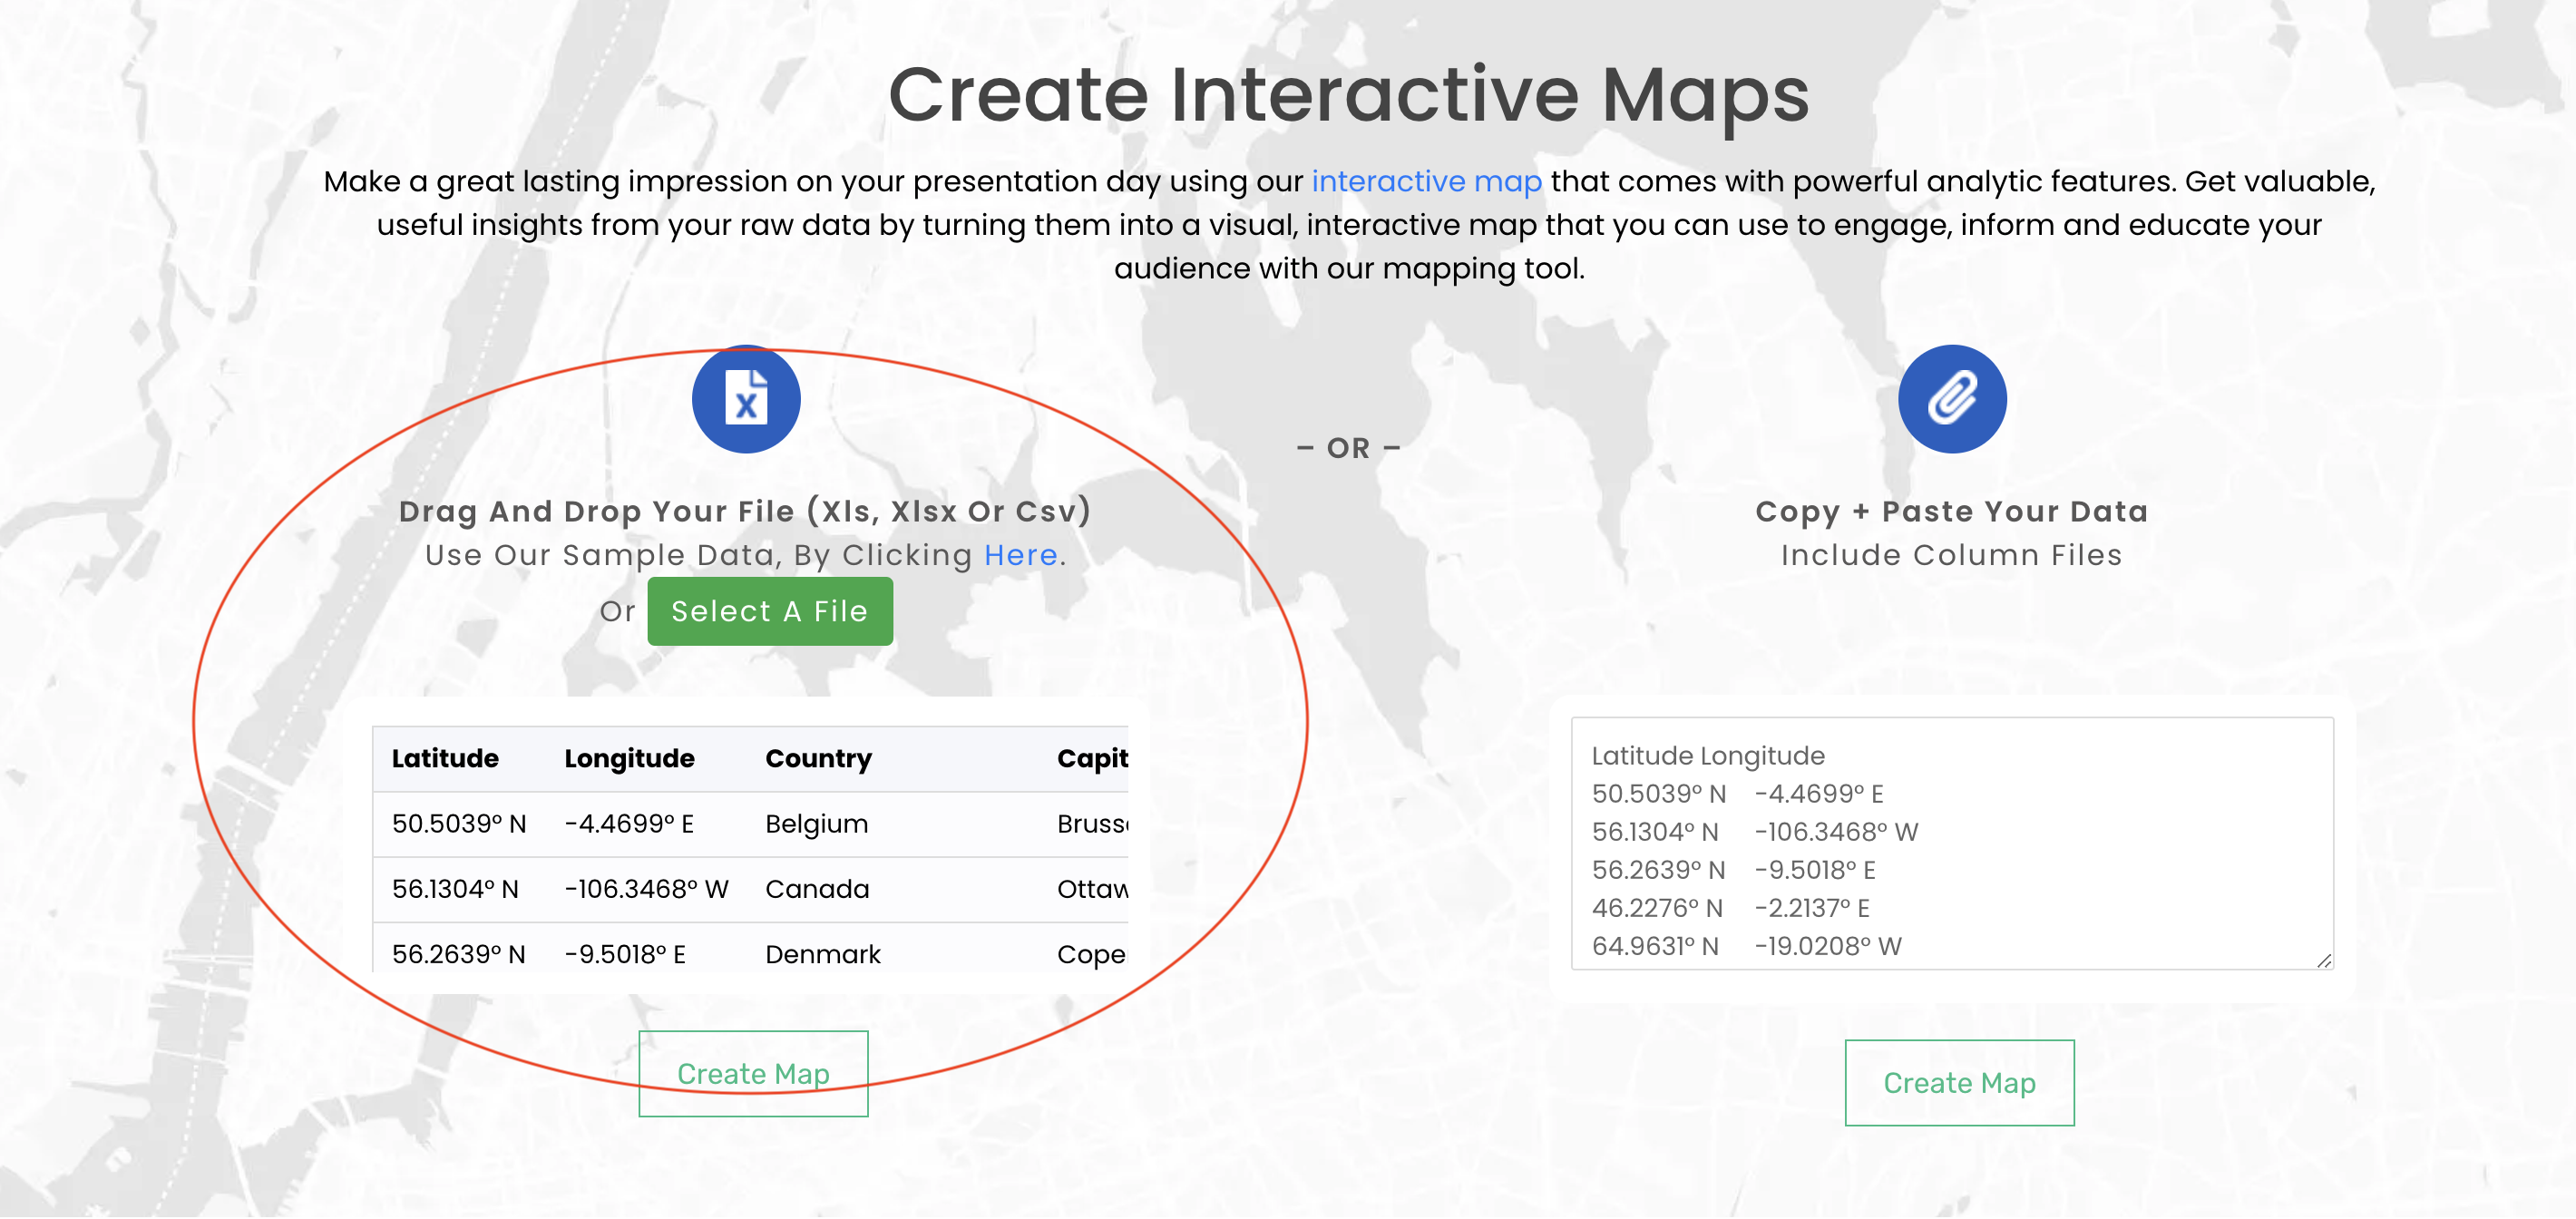 Screenshot of Mapize "Create Interactive Maps" page with a red oval around the "Drag and Drop Your File" field.